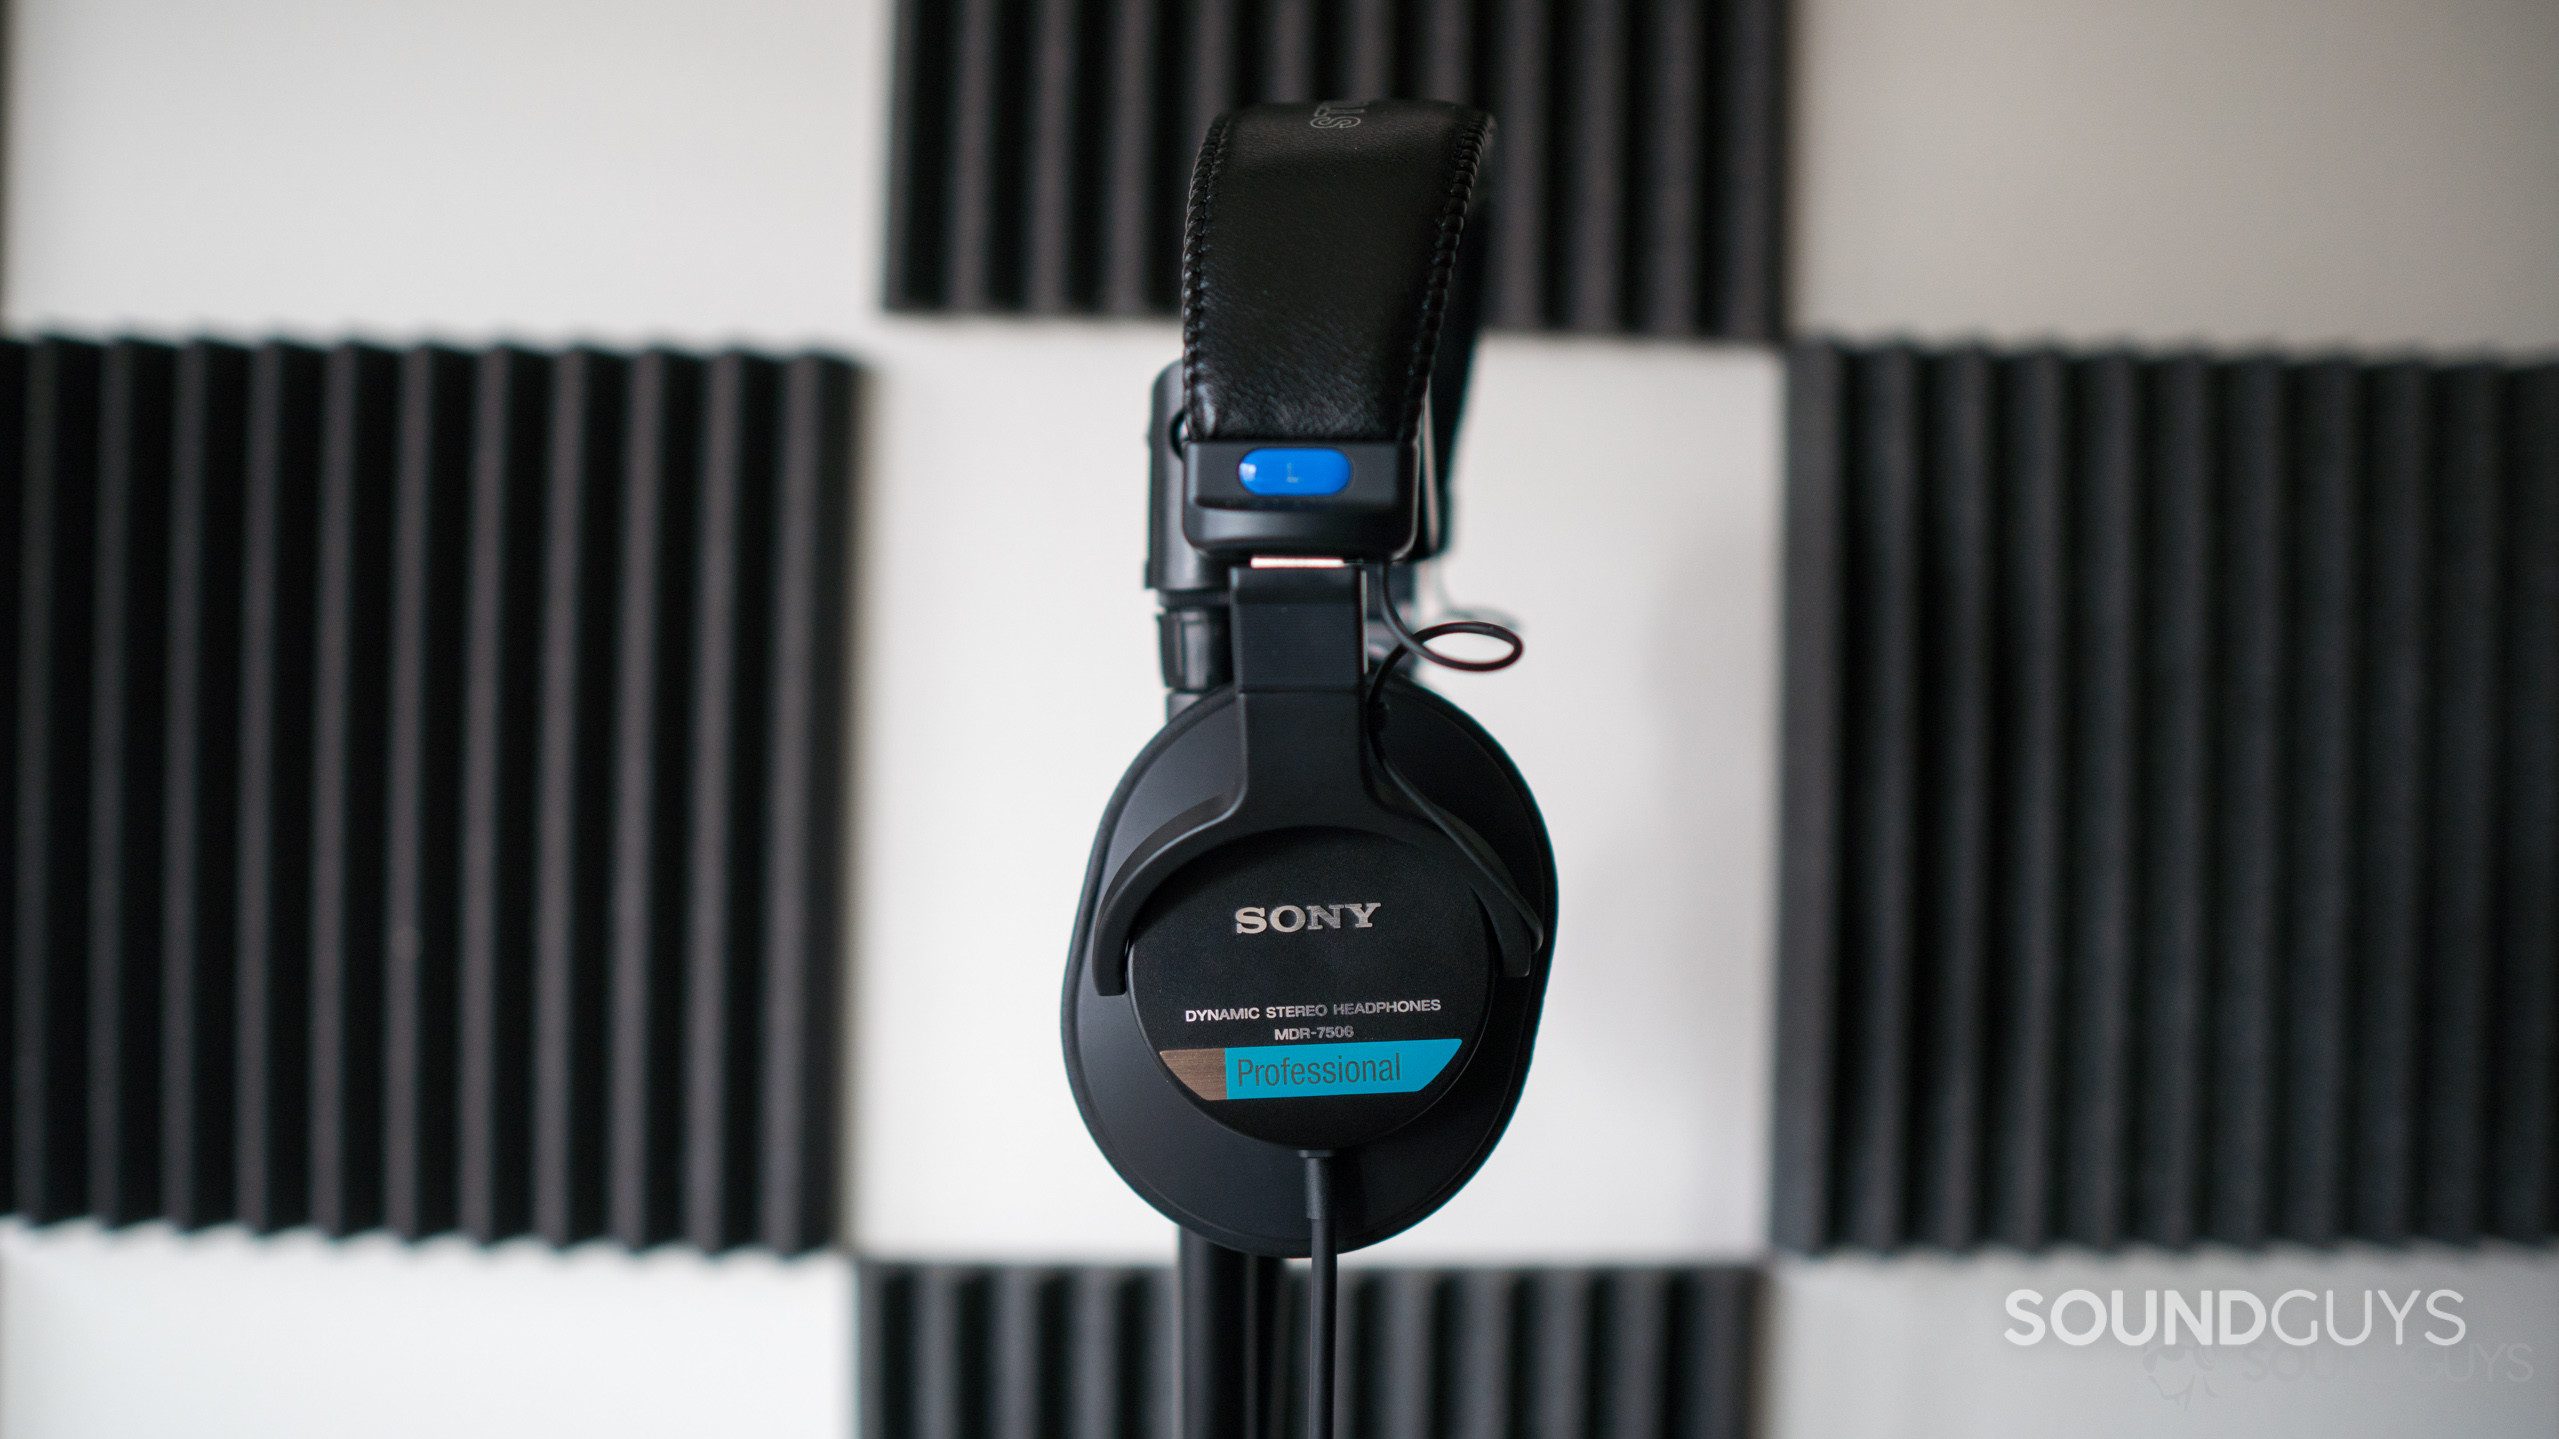 Either side of the Sony MDR-7506 has the letters L or R so you know which is which.